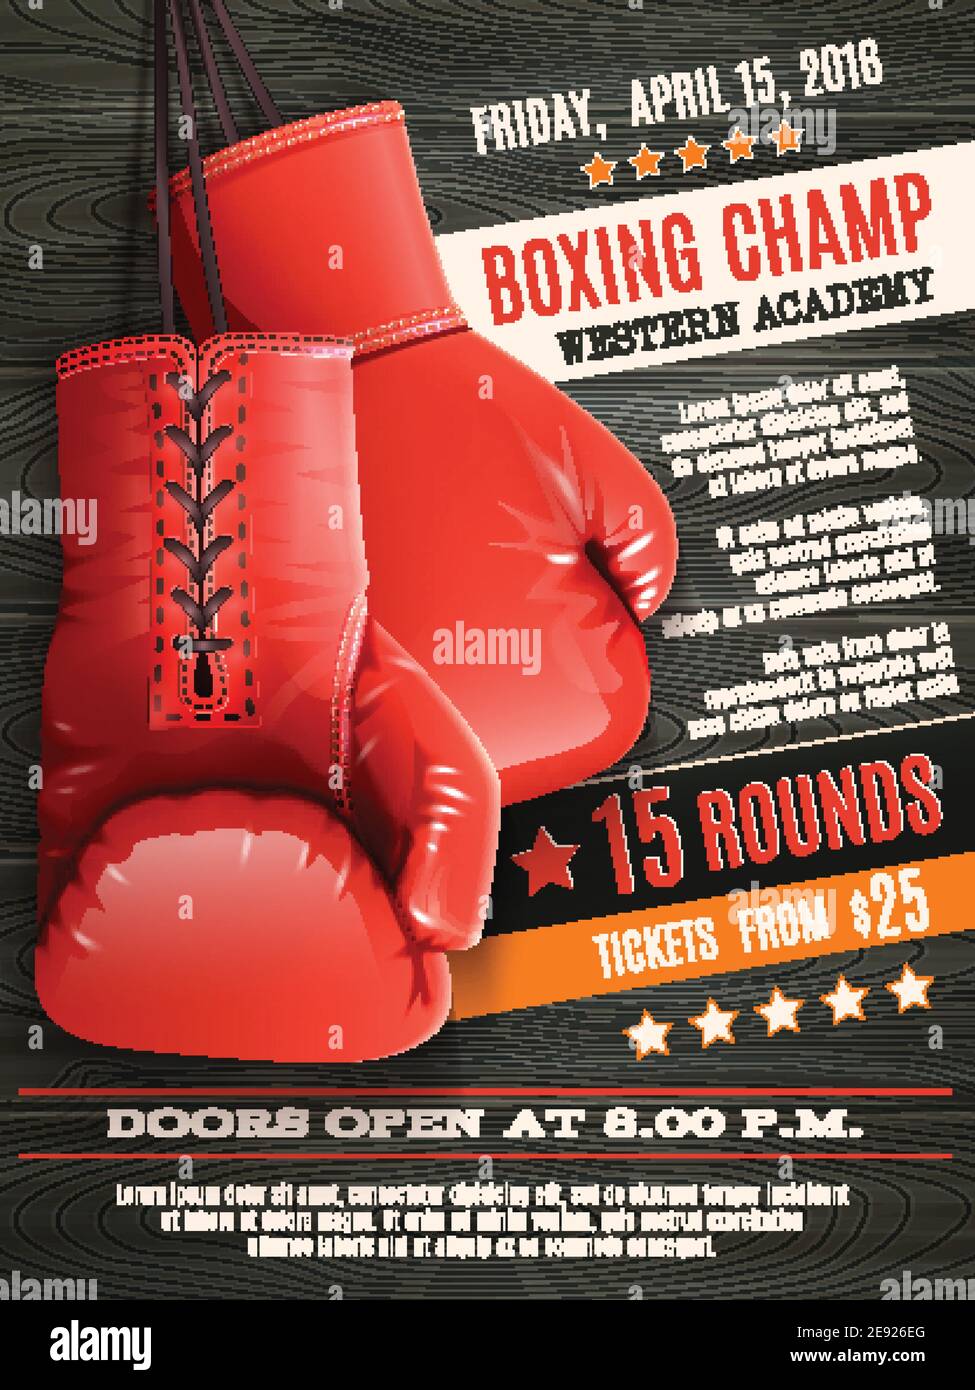 Boxing champ poster with realistic red gloves on wooden background vector illustration Stock Vector